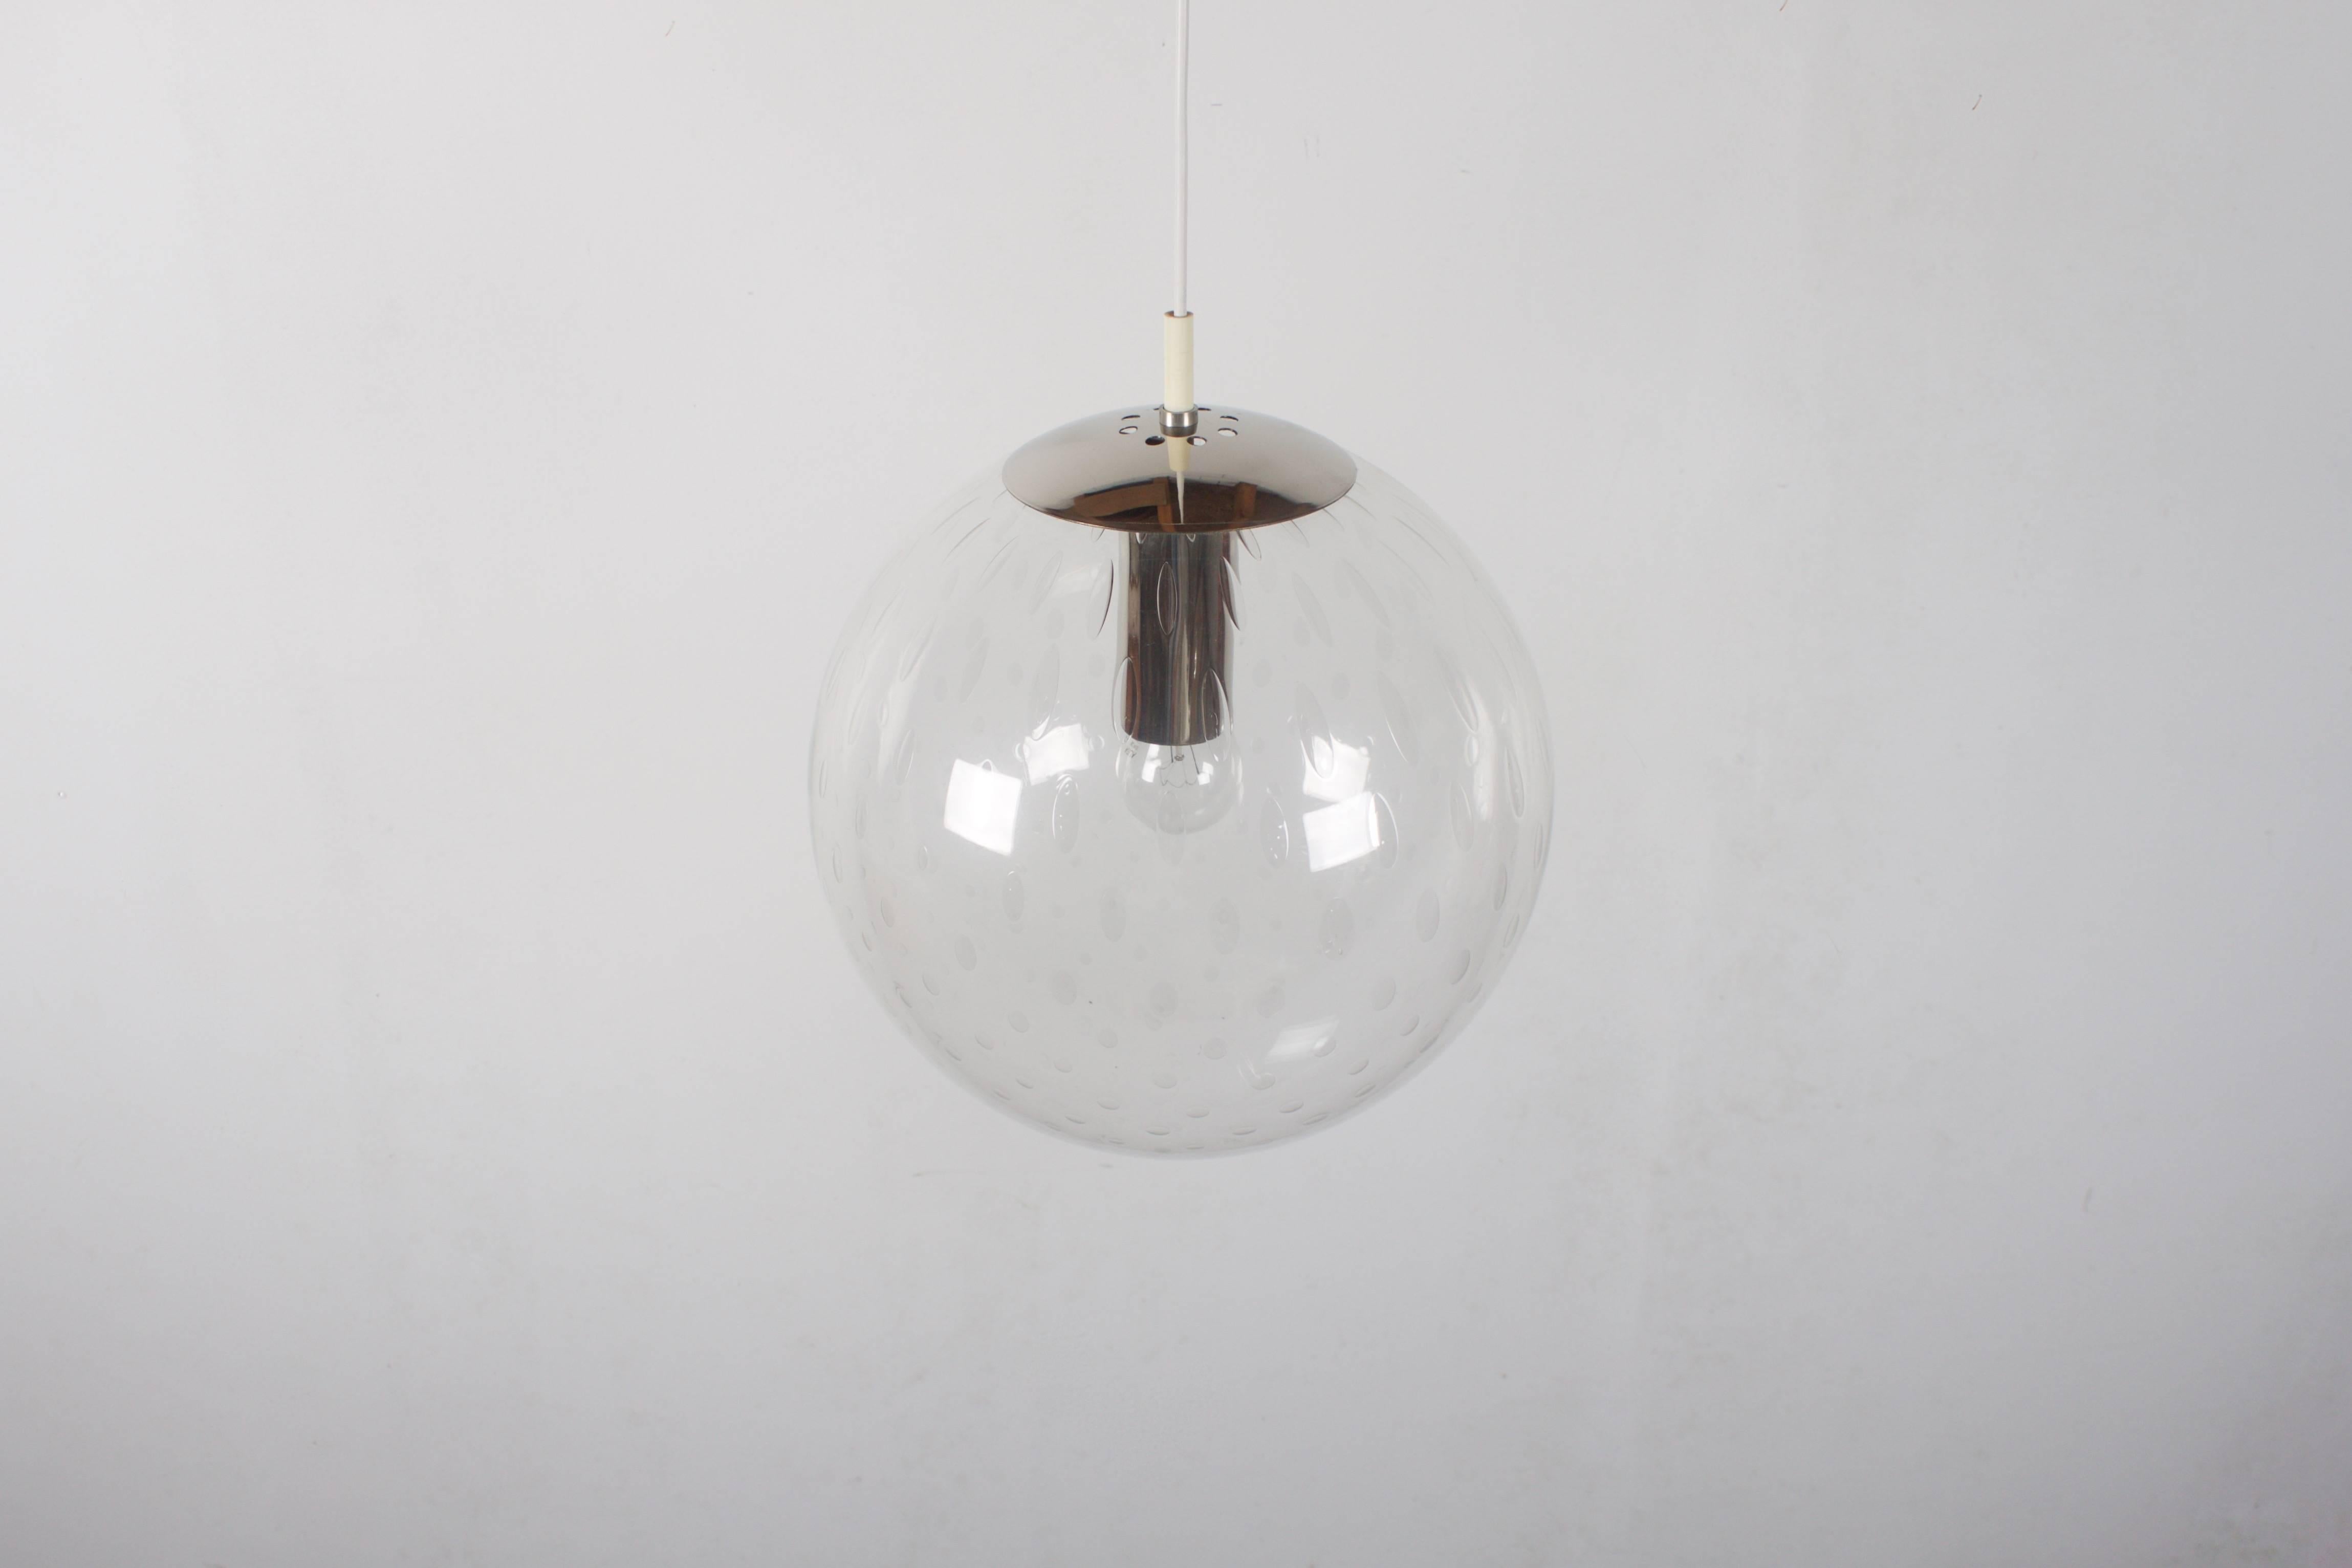 Large ‘Light-drops’ Pendant by RAAK Amsterdam in very good condition.

Four lamps available.

Handblown glass 35 cm. (13.78 Inch) globe with a teardrop pattern trapped inside the glass.

The pattern in the globes creates a spectaculair effect when